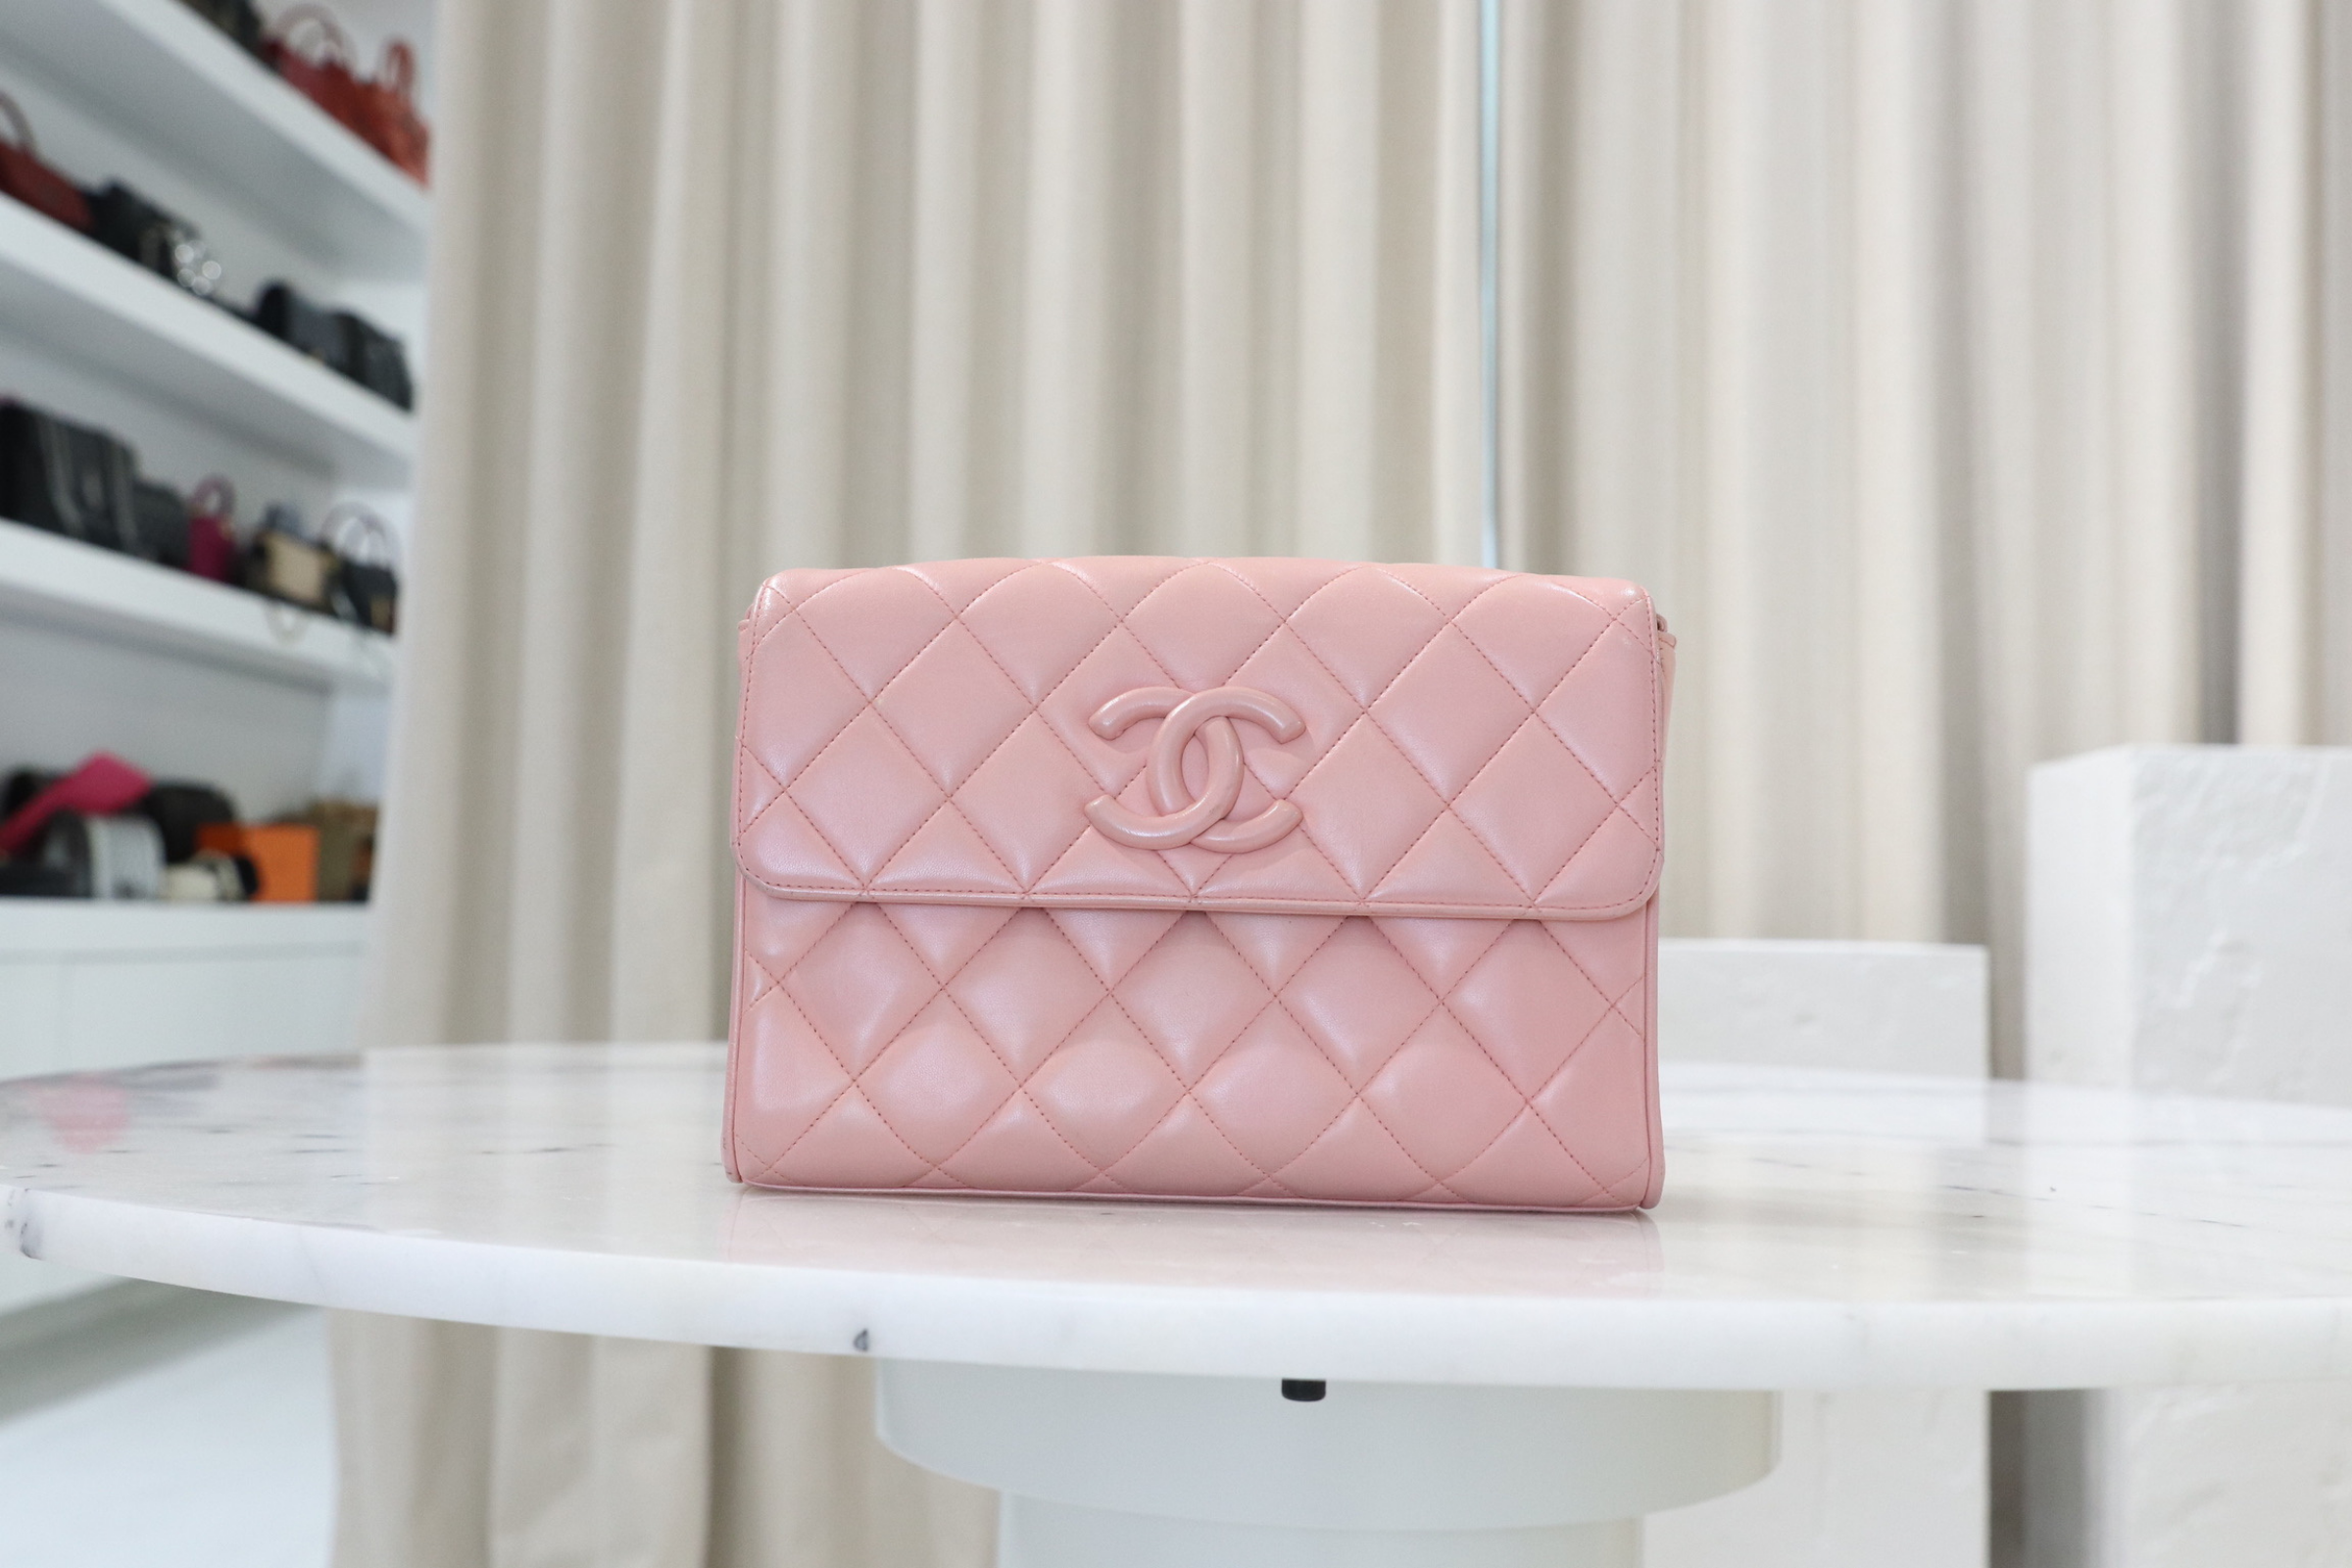 EVERYTHING YOU NEED TO KNOW ABOUT CHANEL'S SERIAL CODES